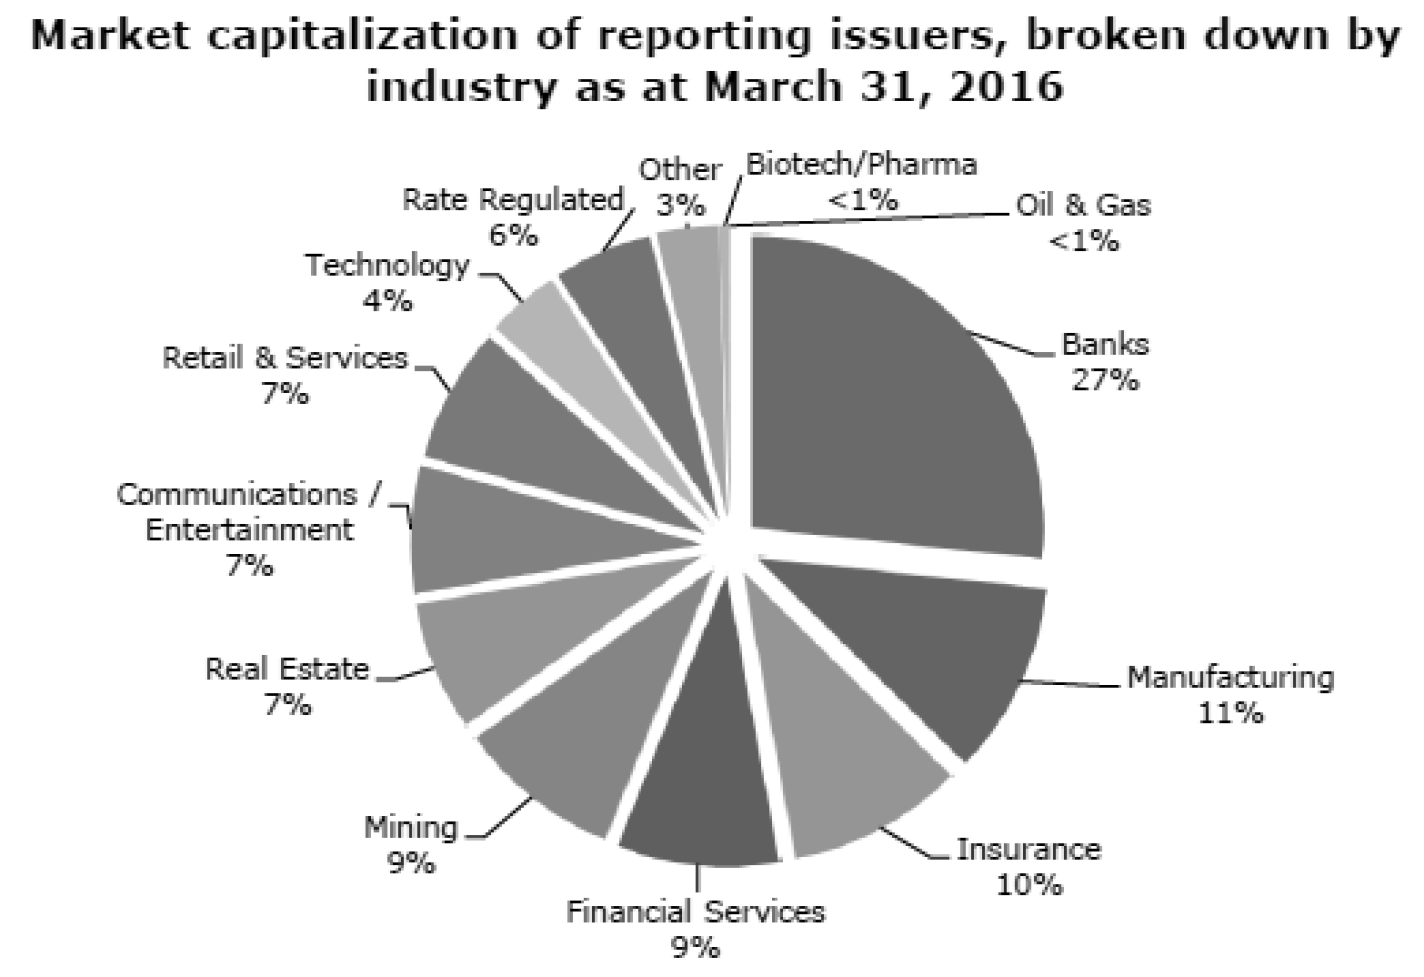 Market capitalization of reporting issuers, broken down by industry as at March 31, 2016